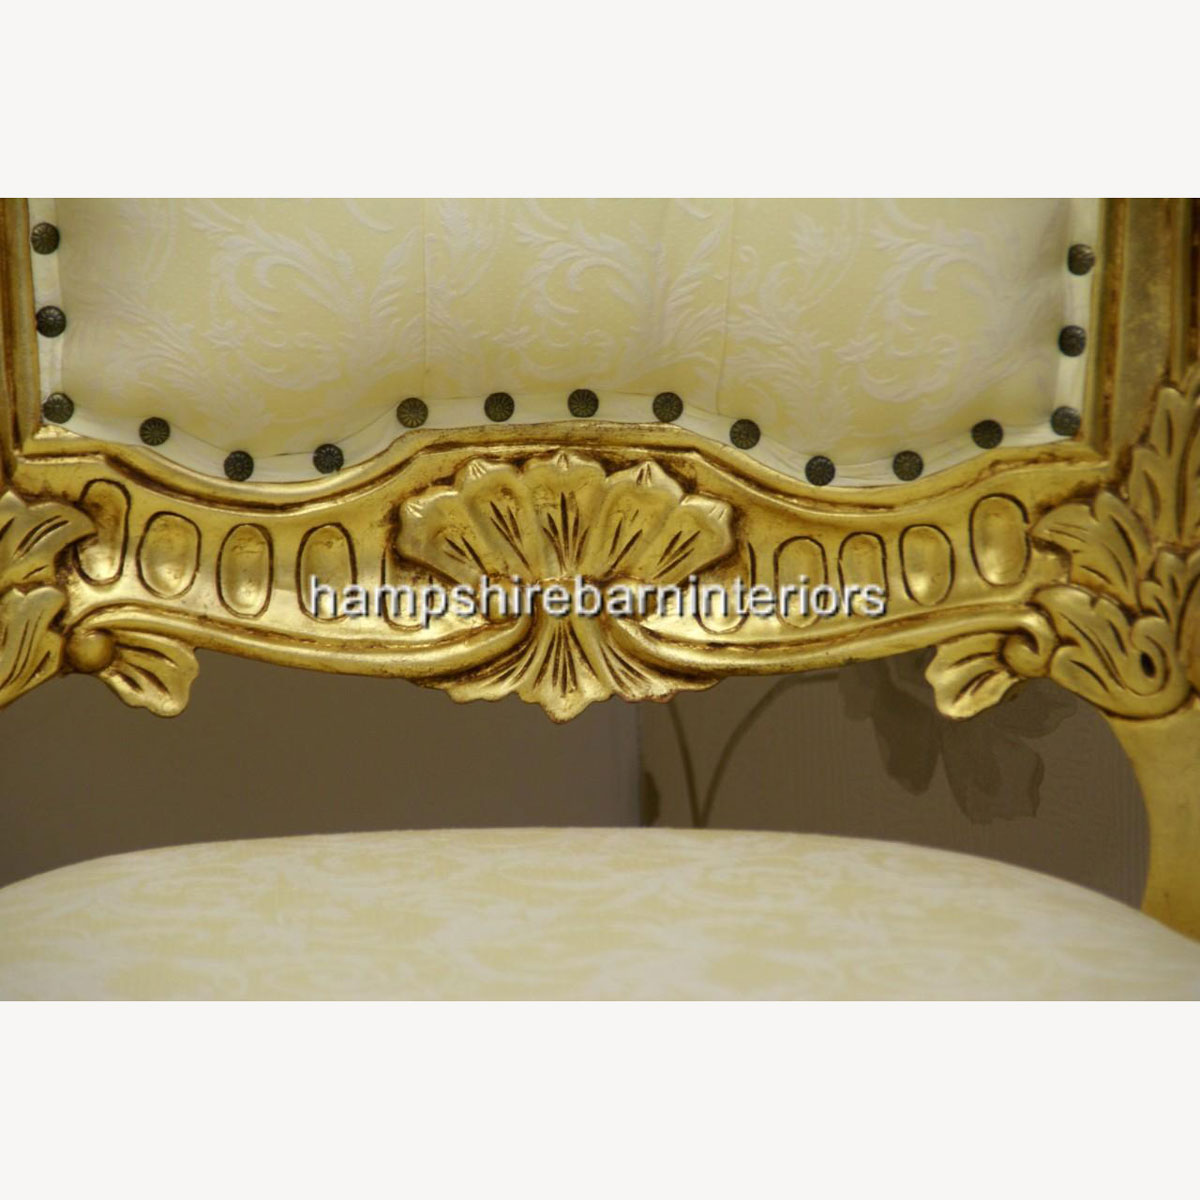 Large Kings Throne Chair In Gold And Cream Fabric 3 - Hampshire Barn Interiors - Large Kings Throne Chair In Gold And Cream Fabric -